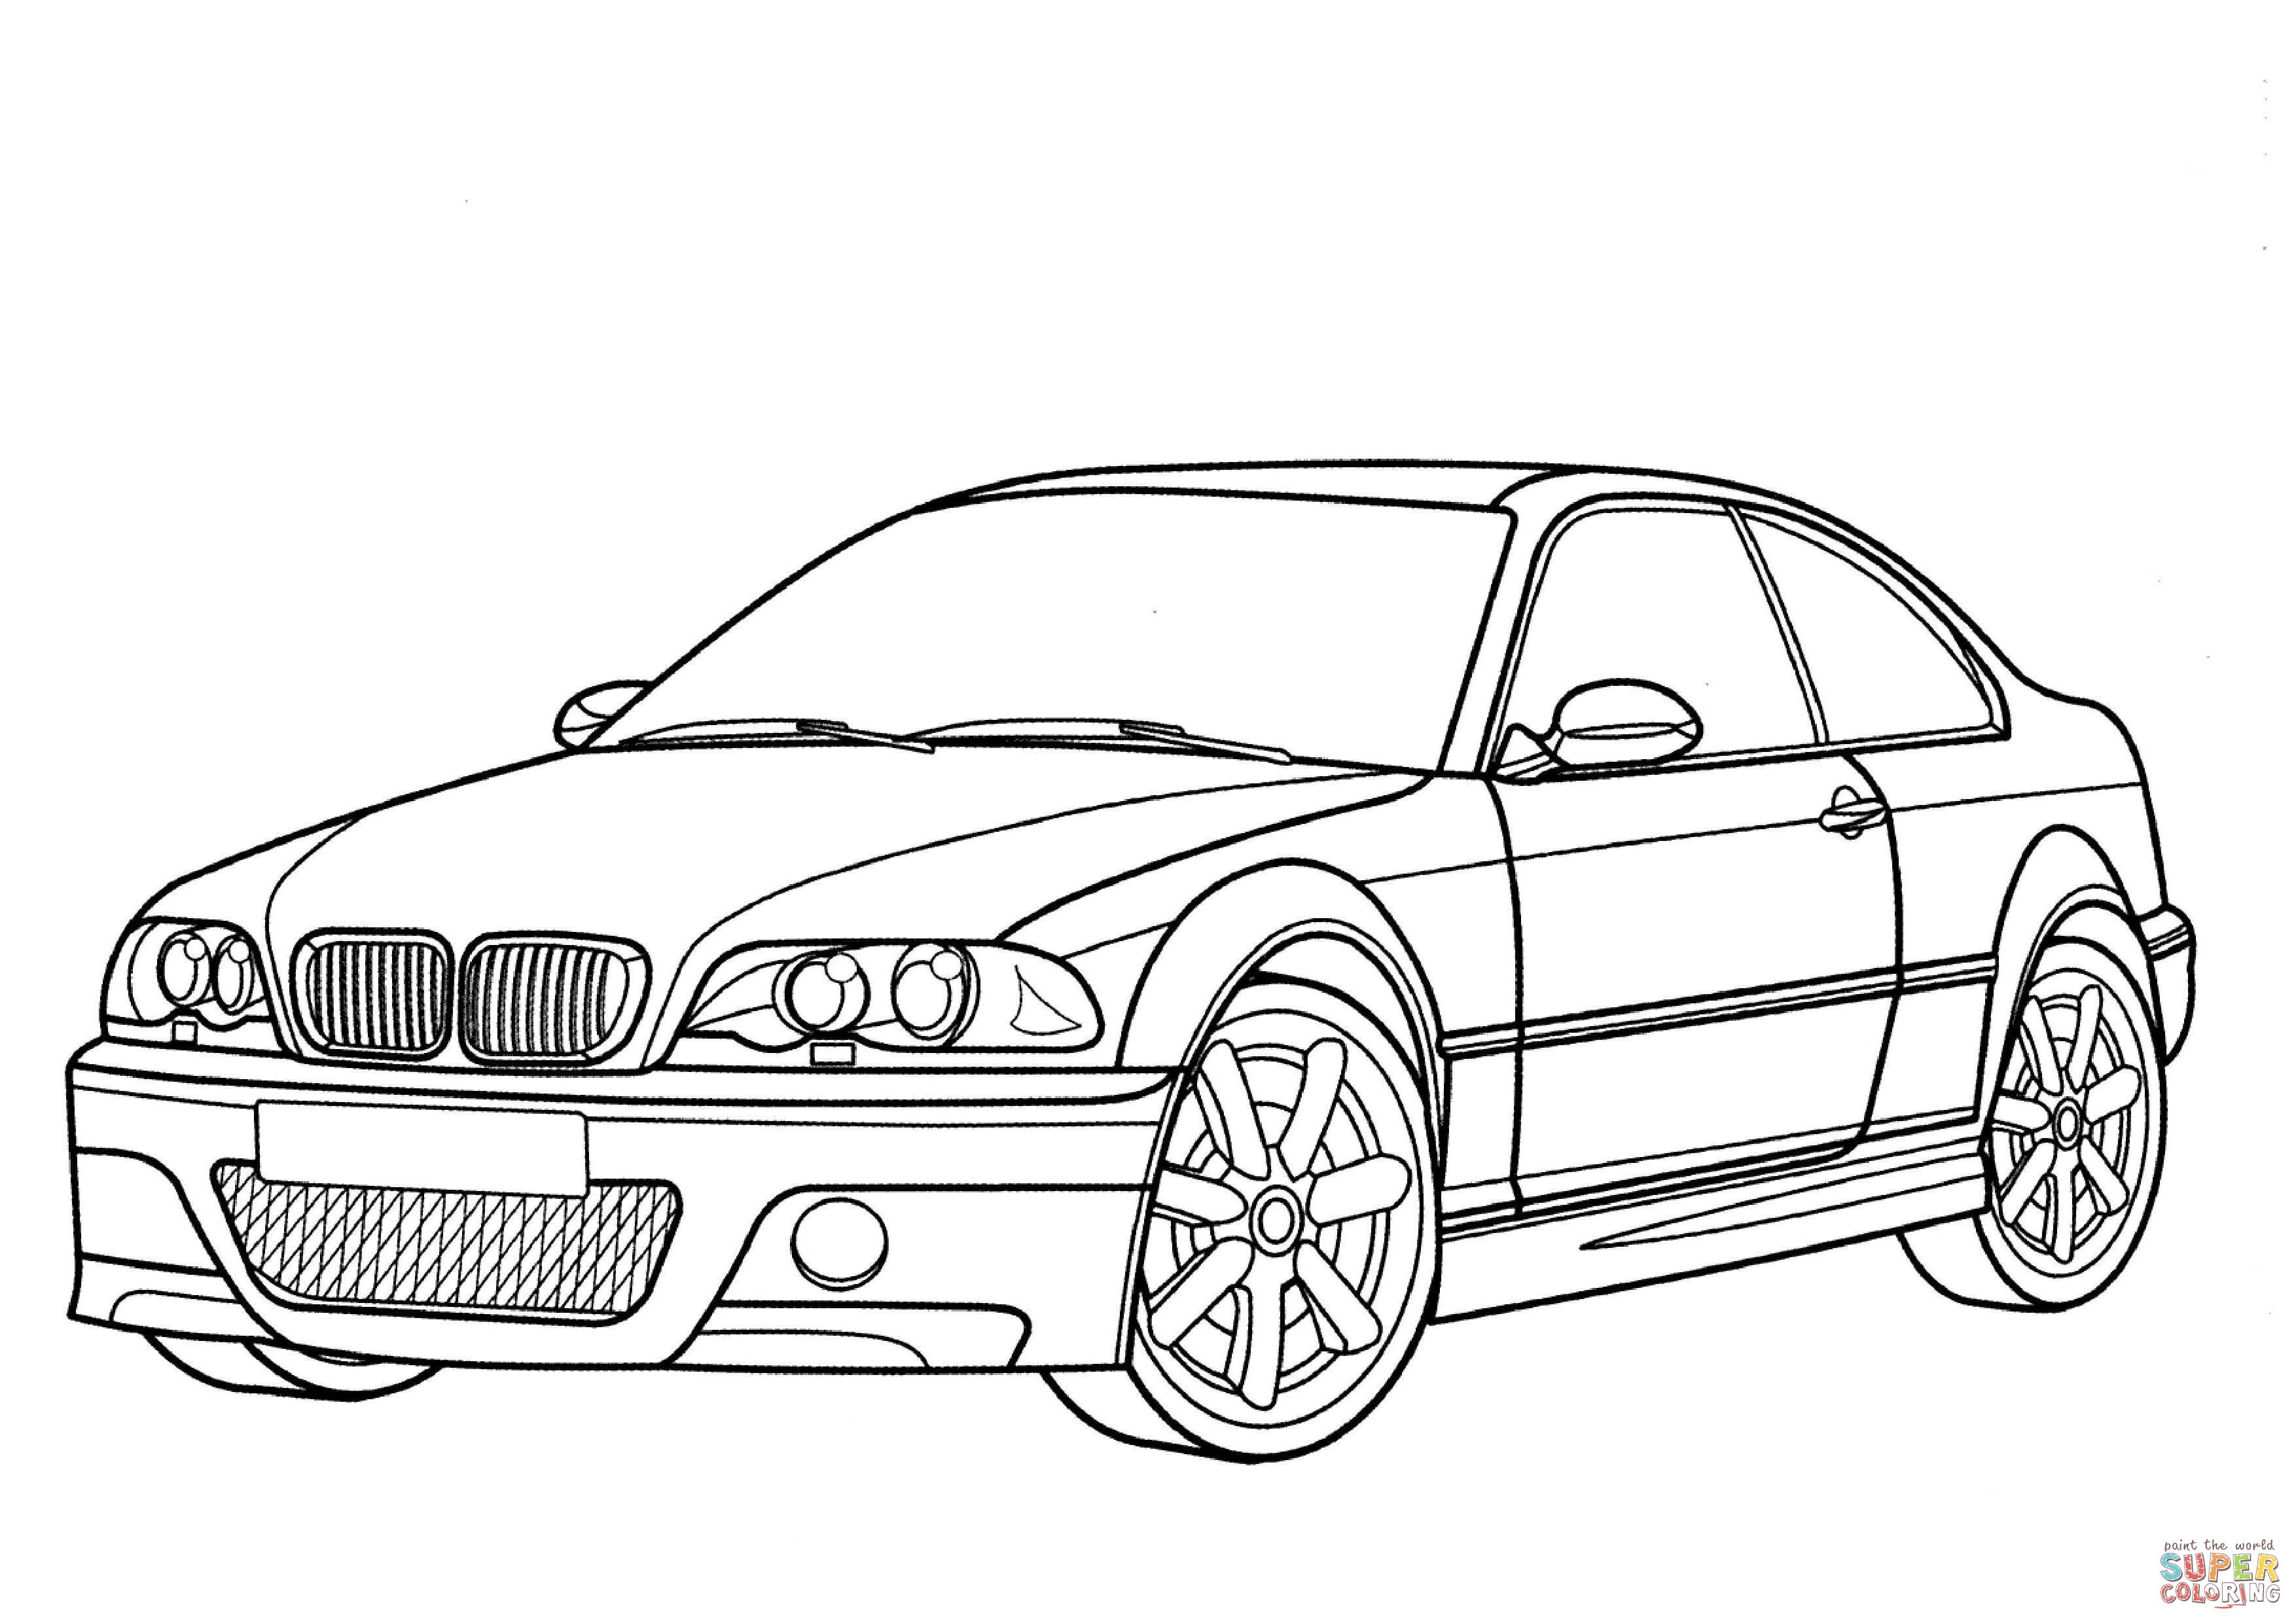 Bmw coloring pages to download and print for free